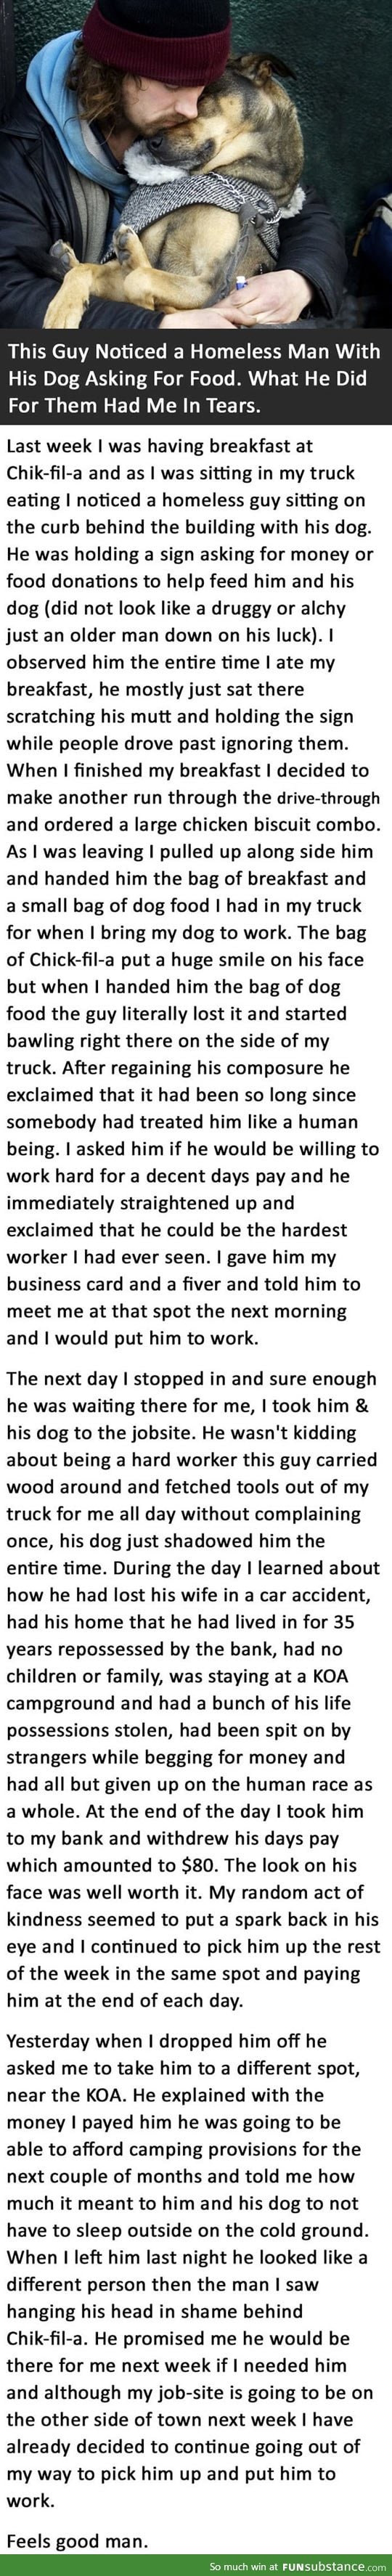 Guy notices a homeless man with his dog